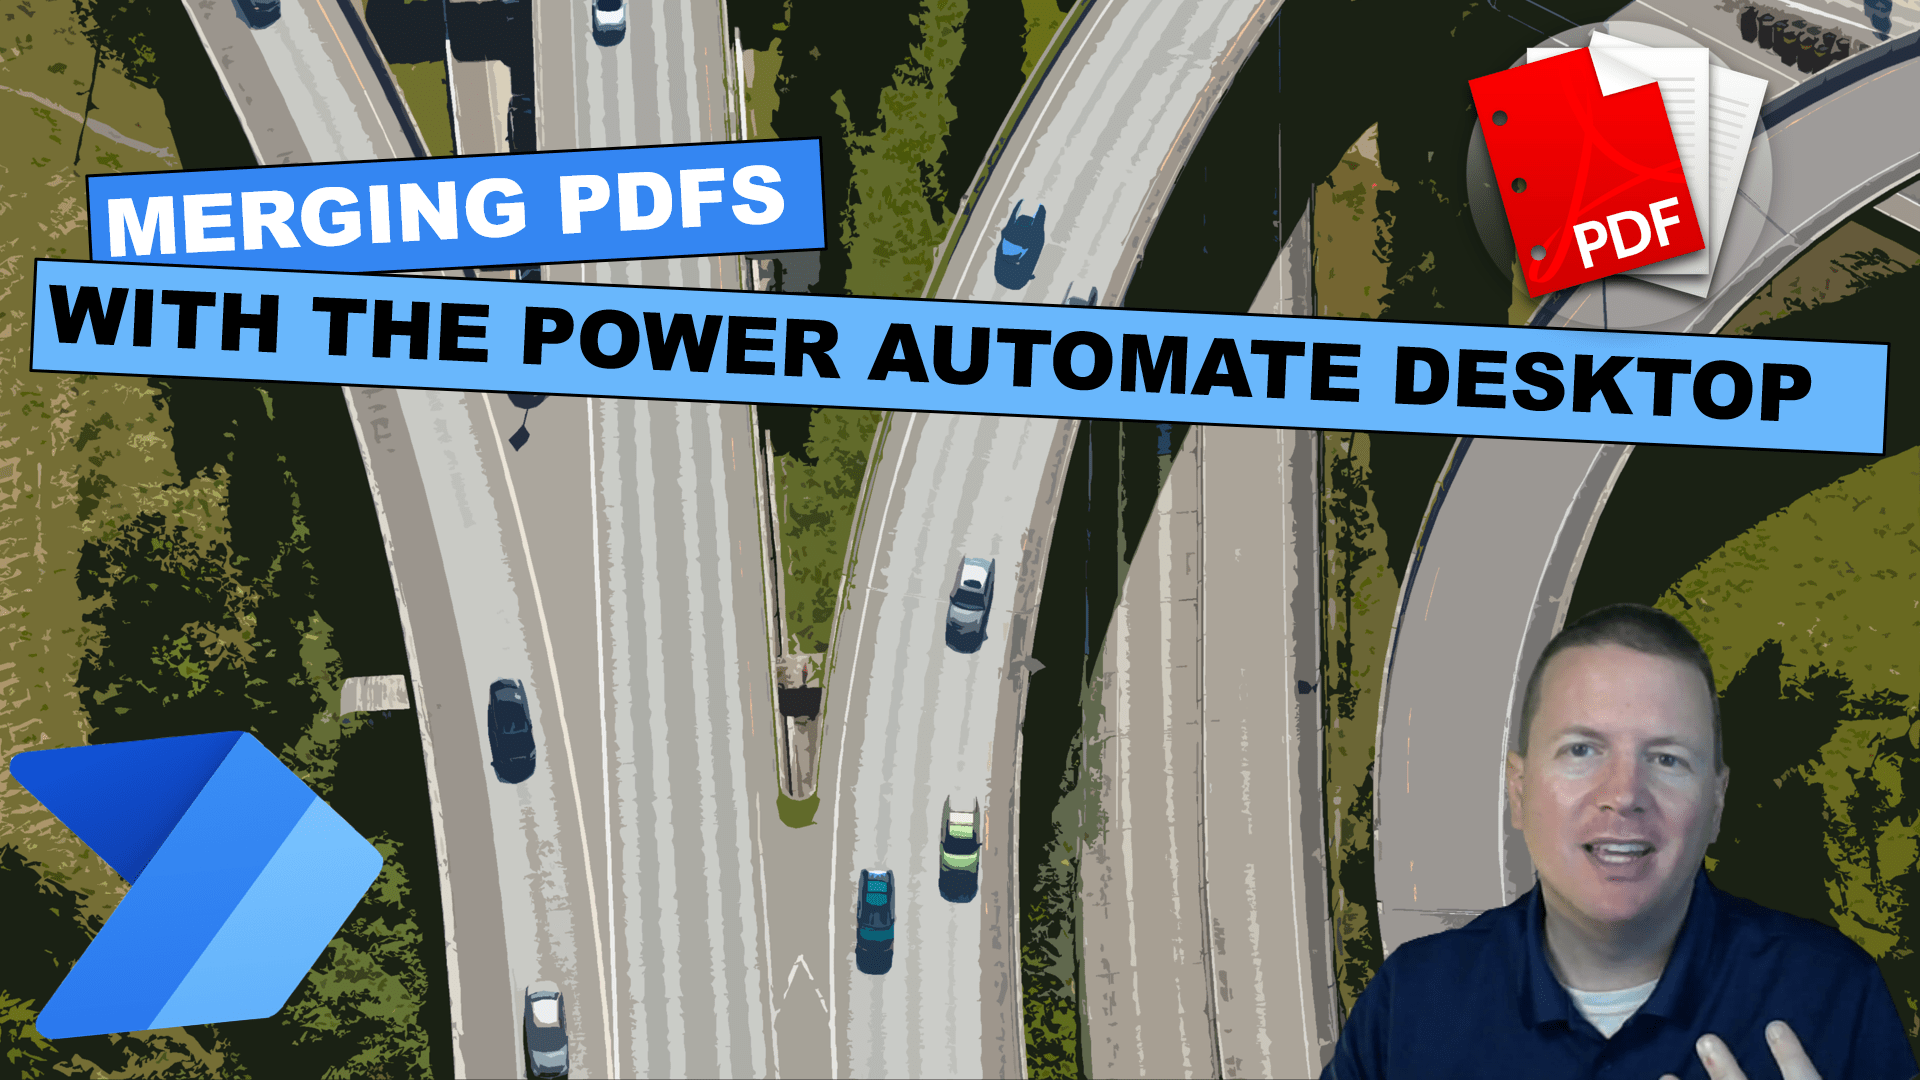 Merging PDF'S with the Power to Automate Desktop Cover image